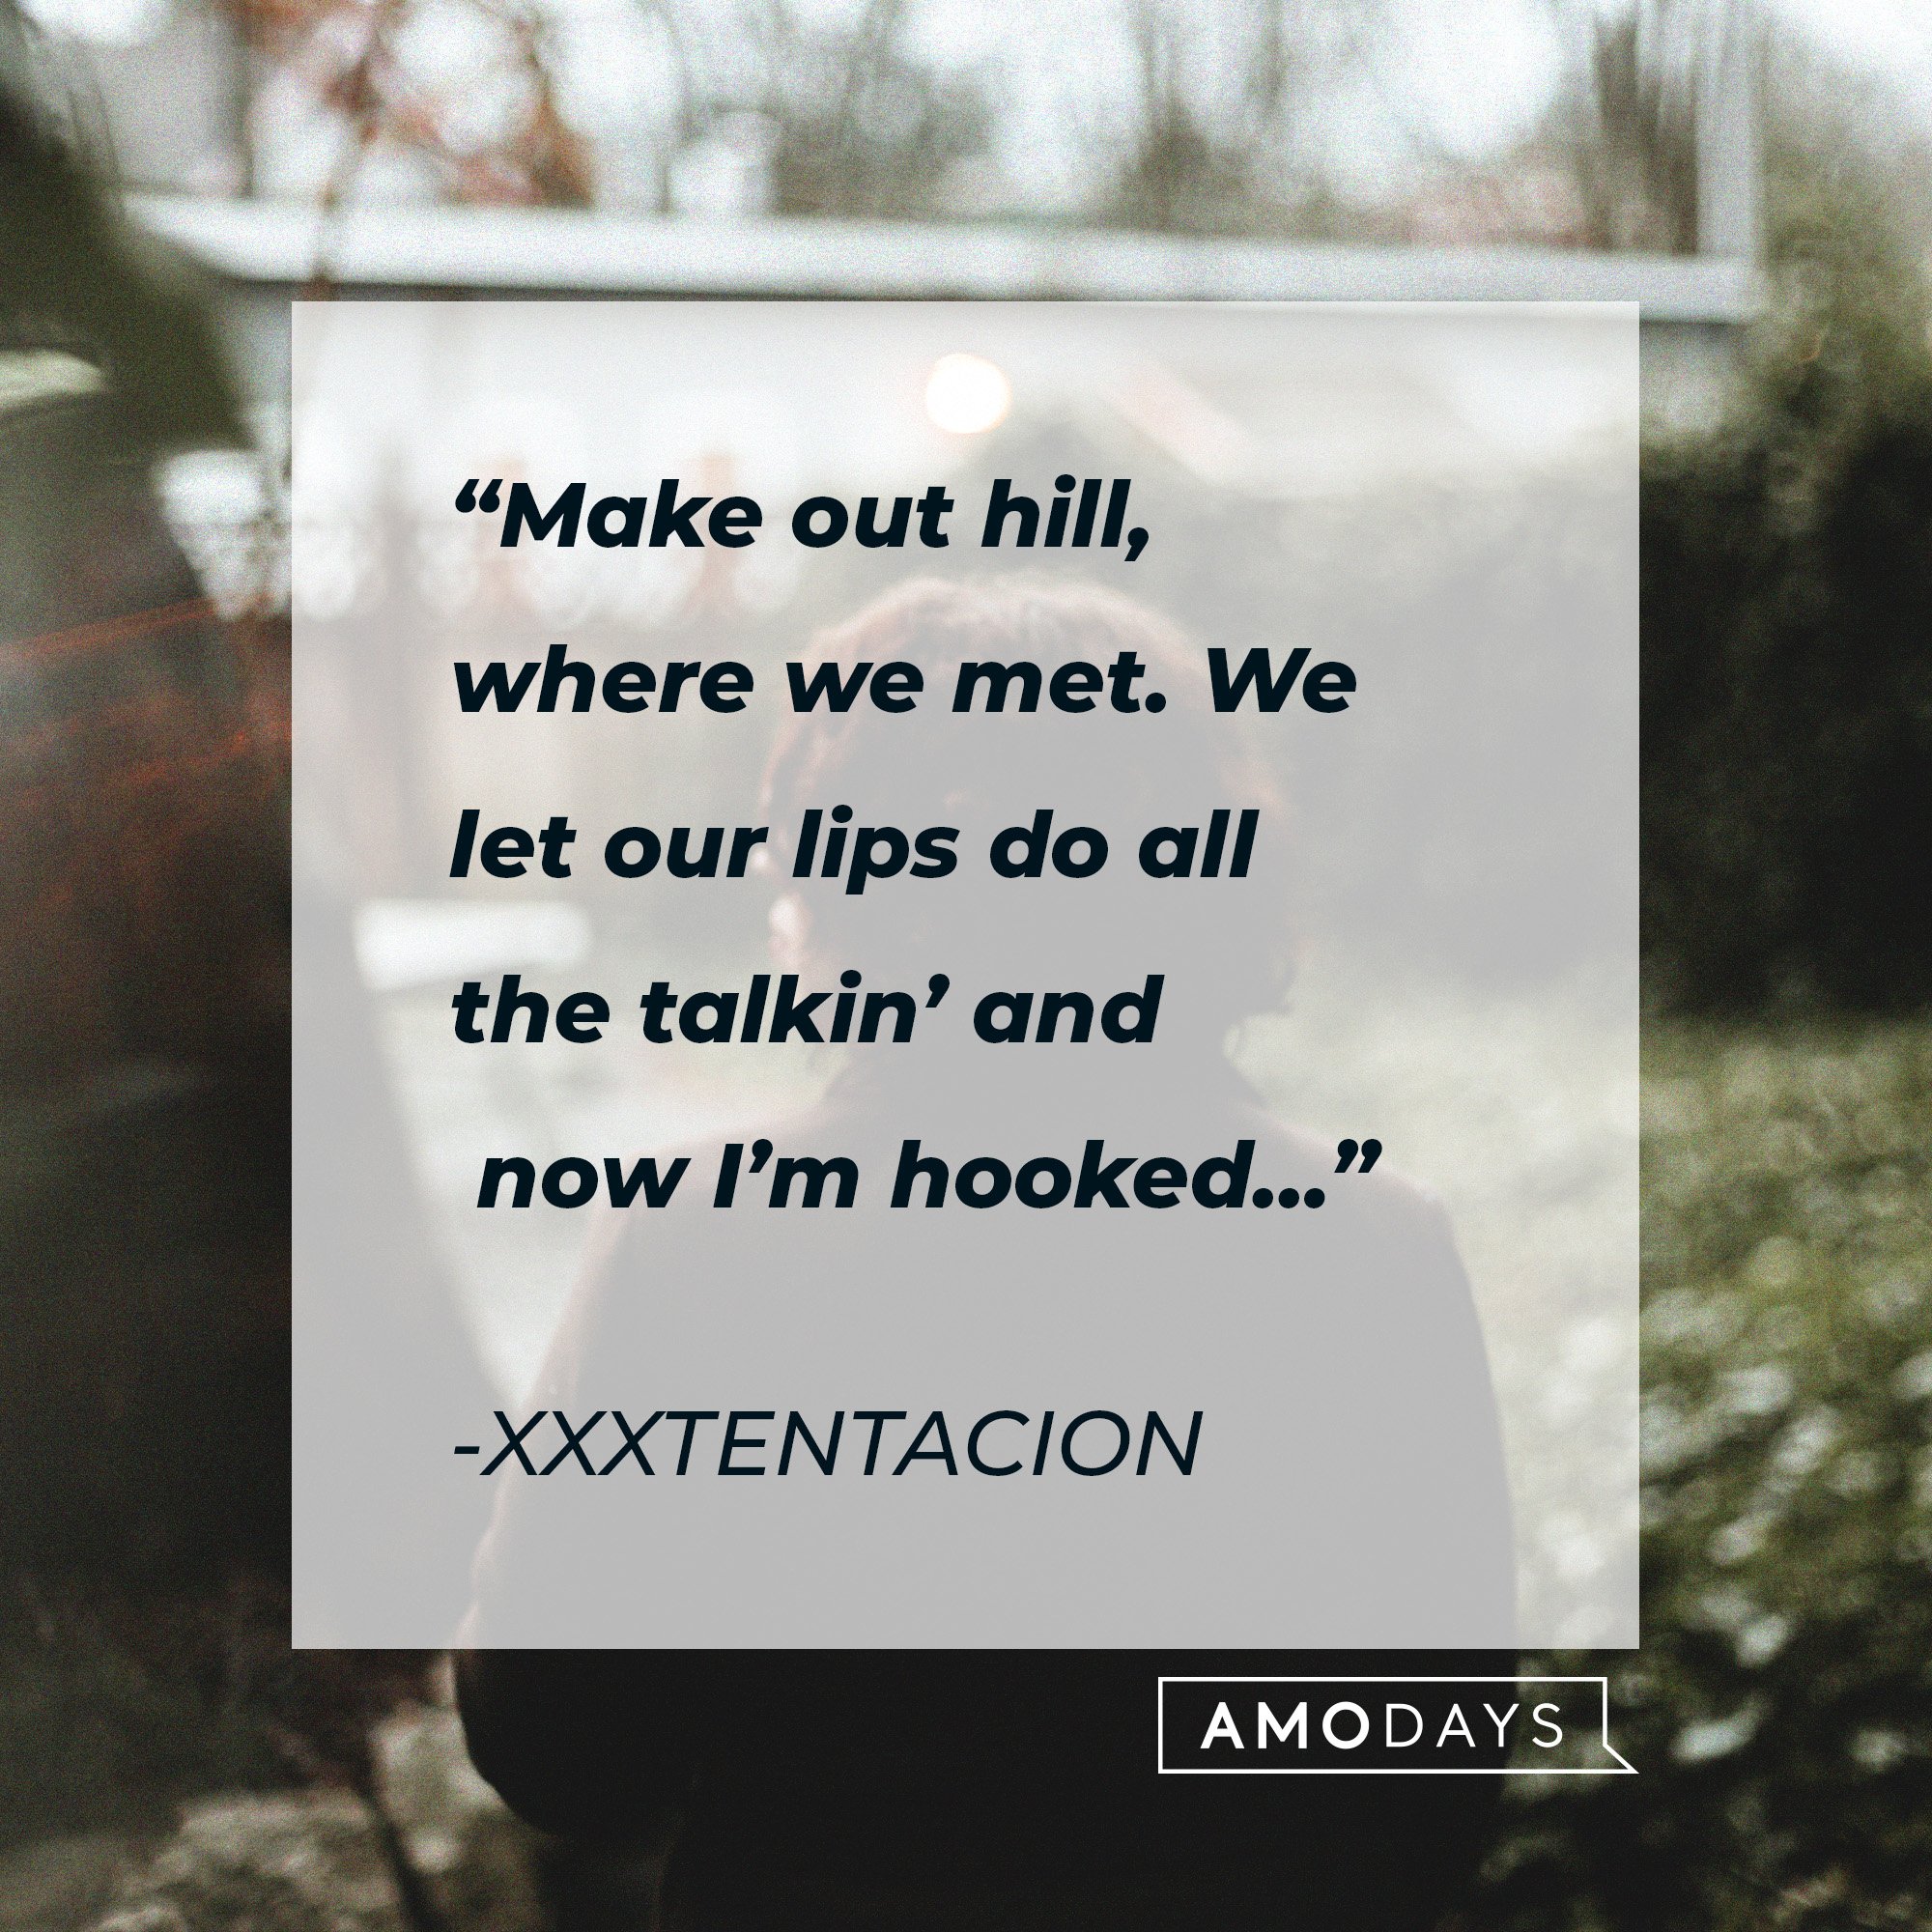 Xxxtentacion’s quote: "Make out hill, where we met we let our lips do all the talkin' and now I'm hooked..." | Image: AmoDays